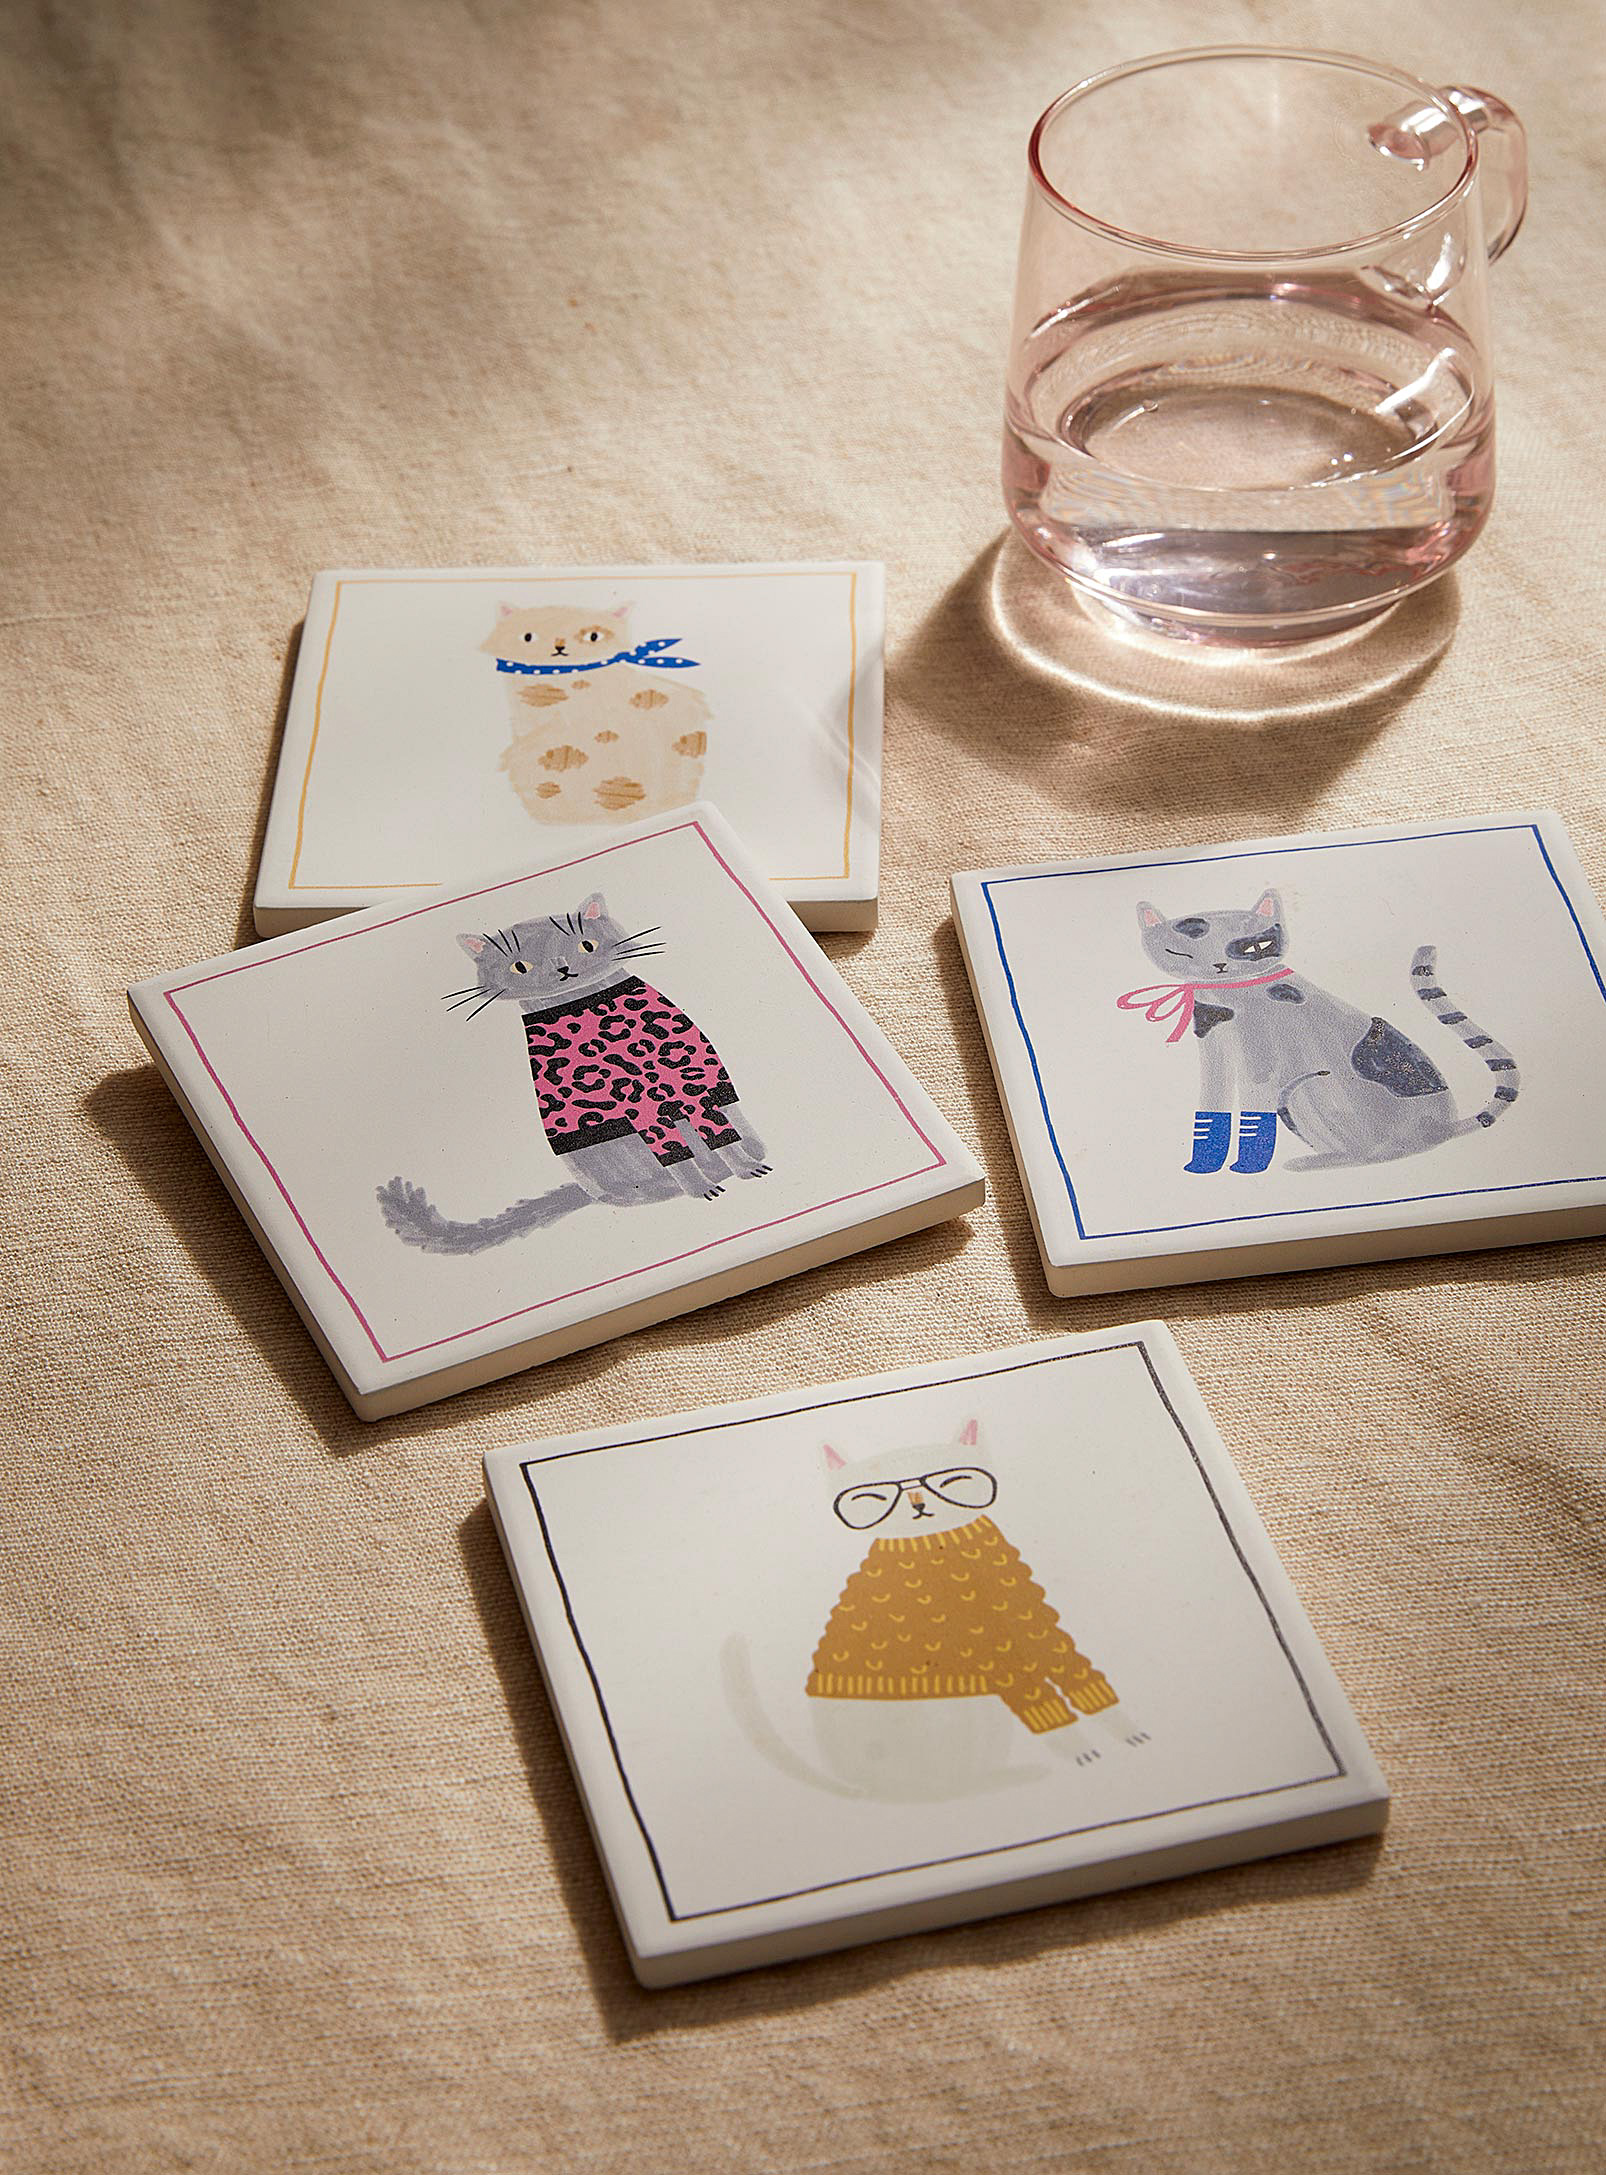 Danica Dressed-up Kitten Coasters Set Of 4 In Assorted